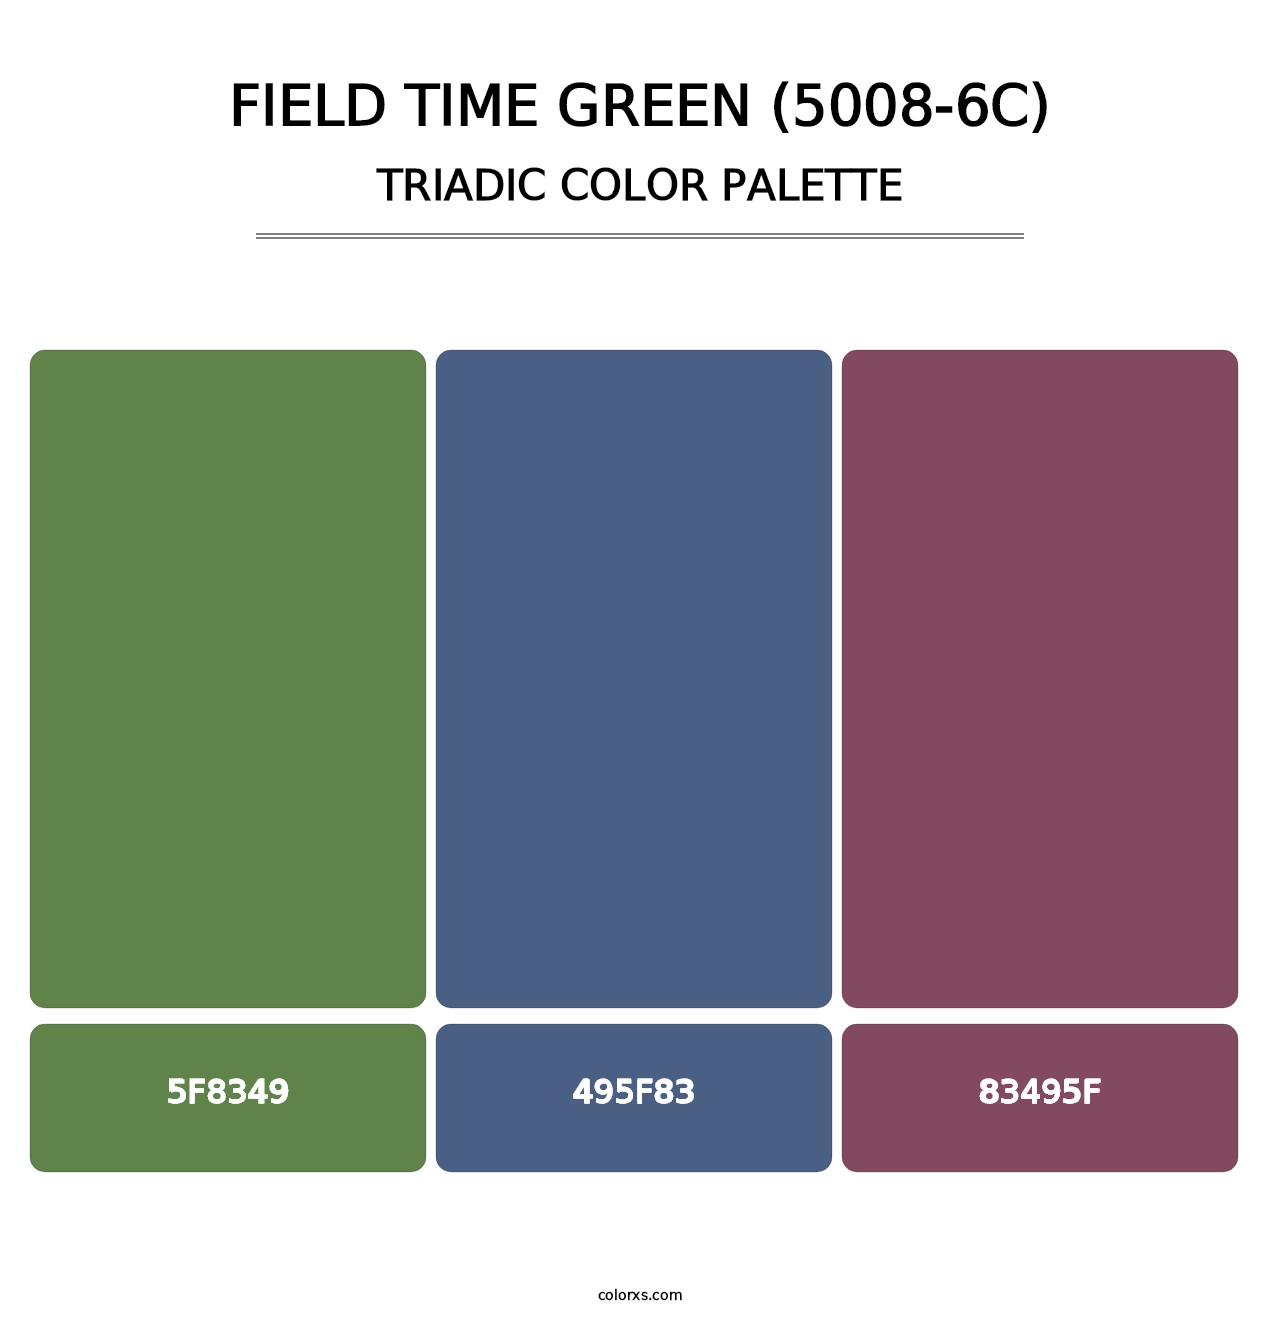 Field Time Green (5008-6C) - Triadic Color Palette